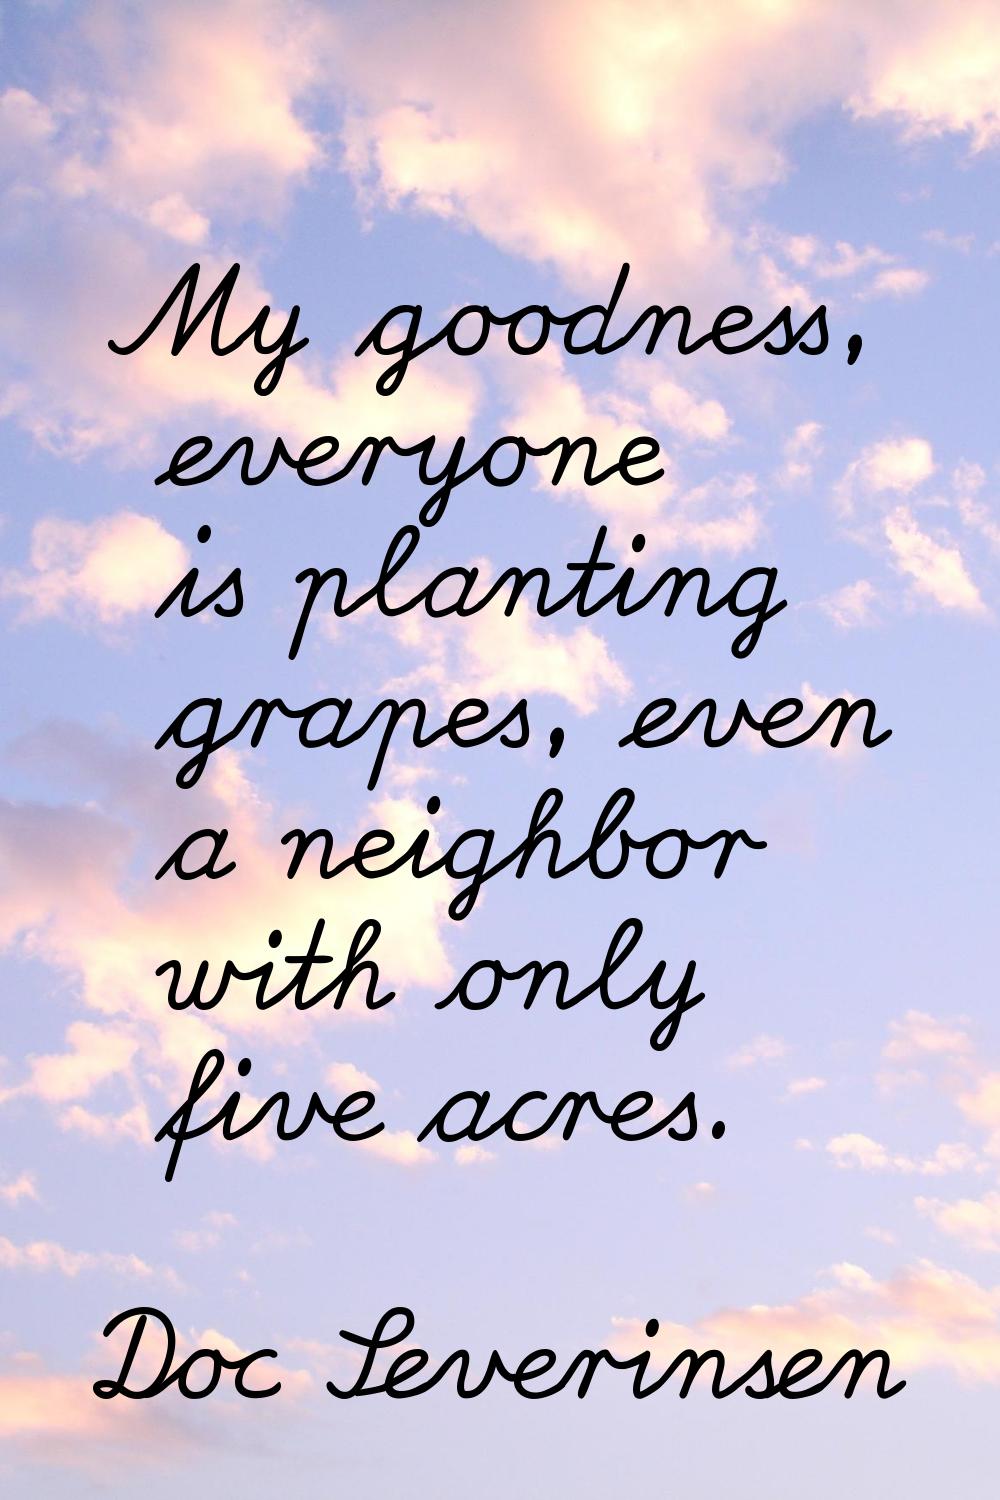 My goodness, everyone is planting grapes, even a neighbor with only five acres.